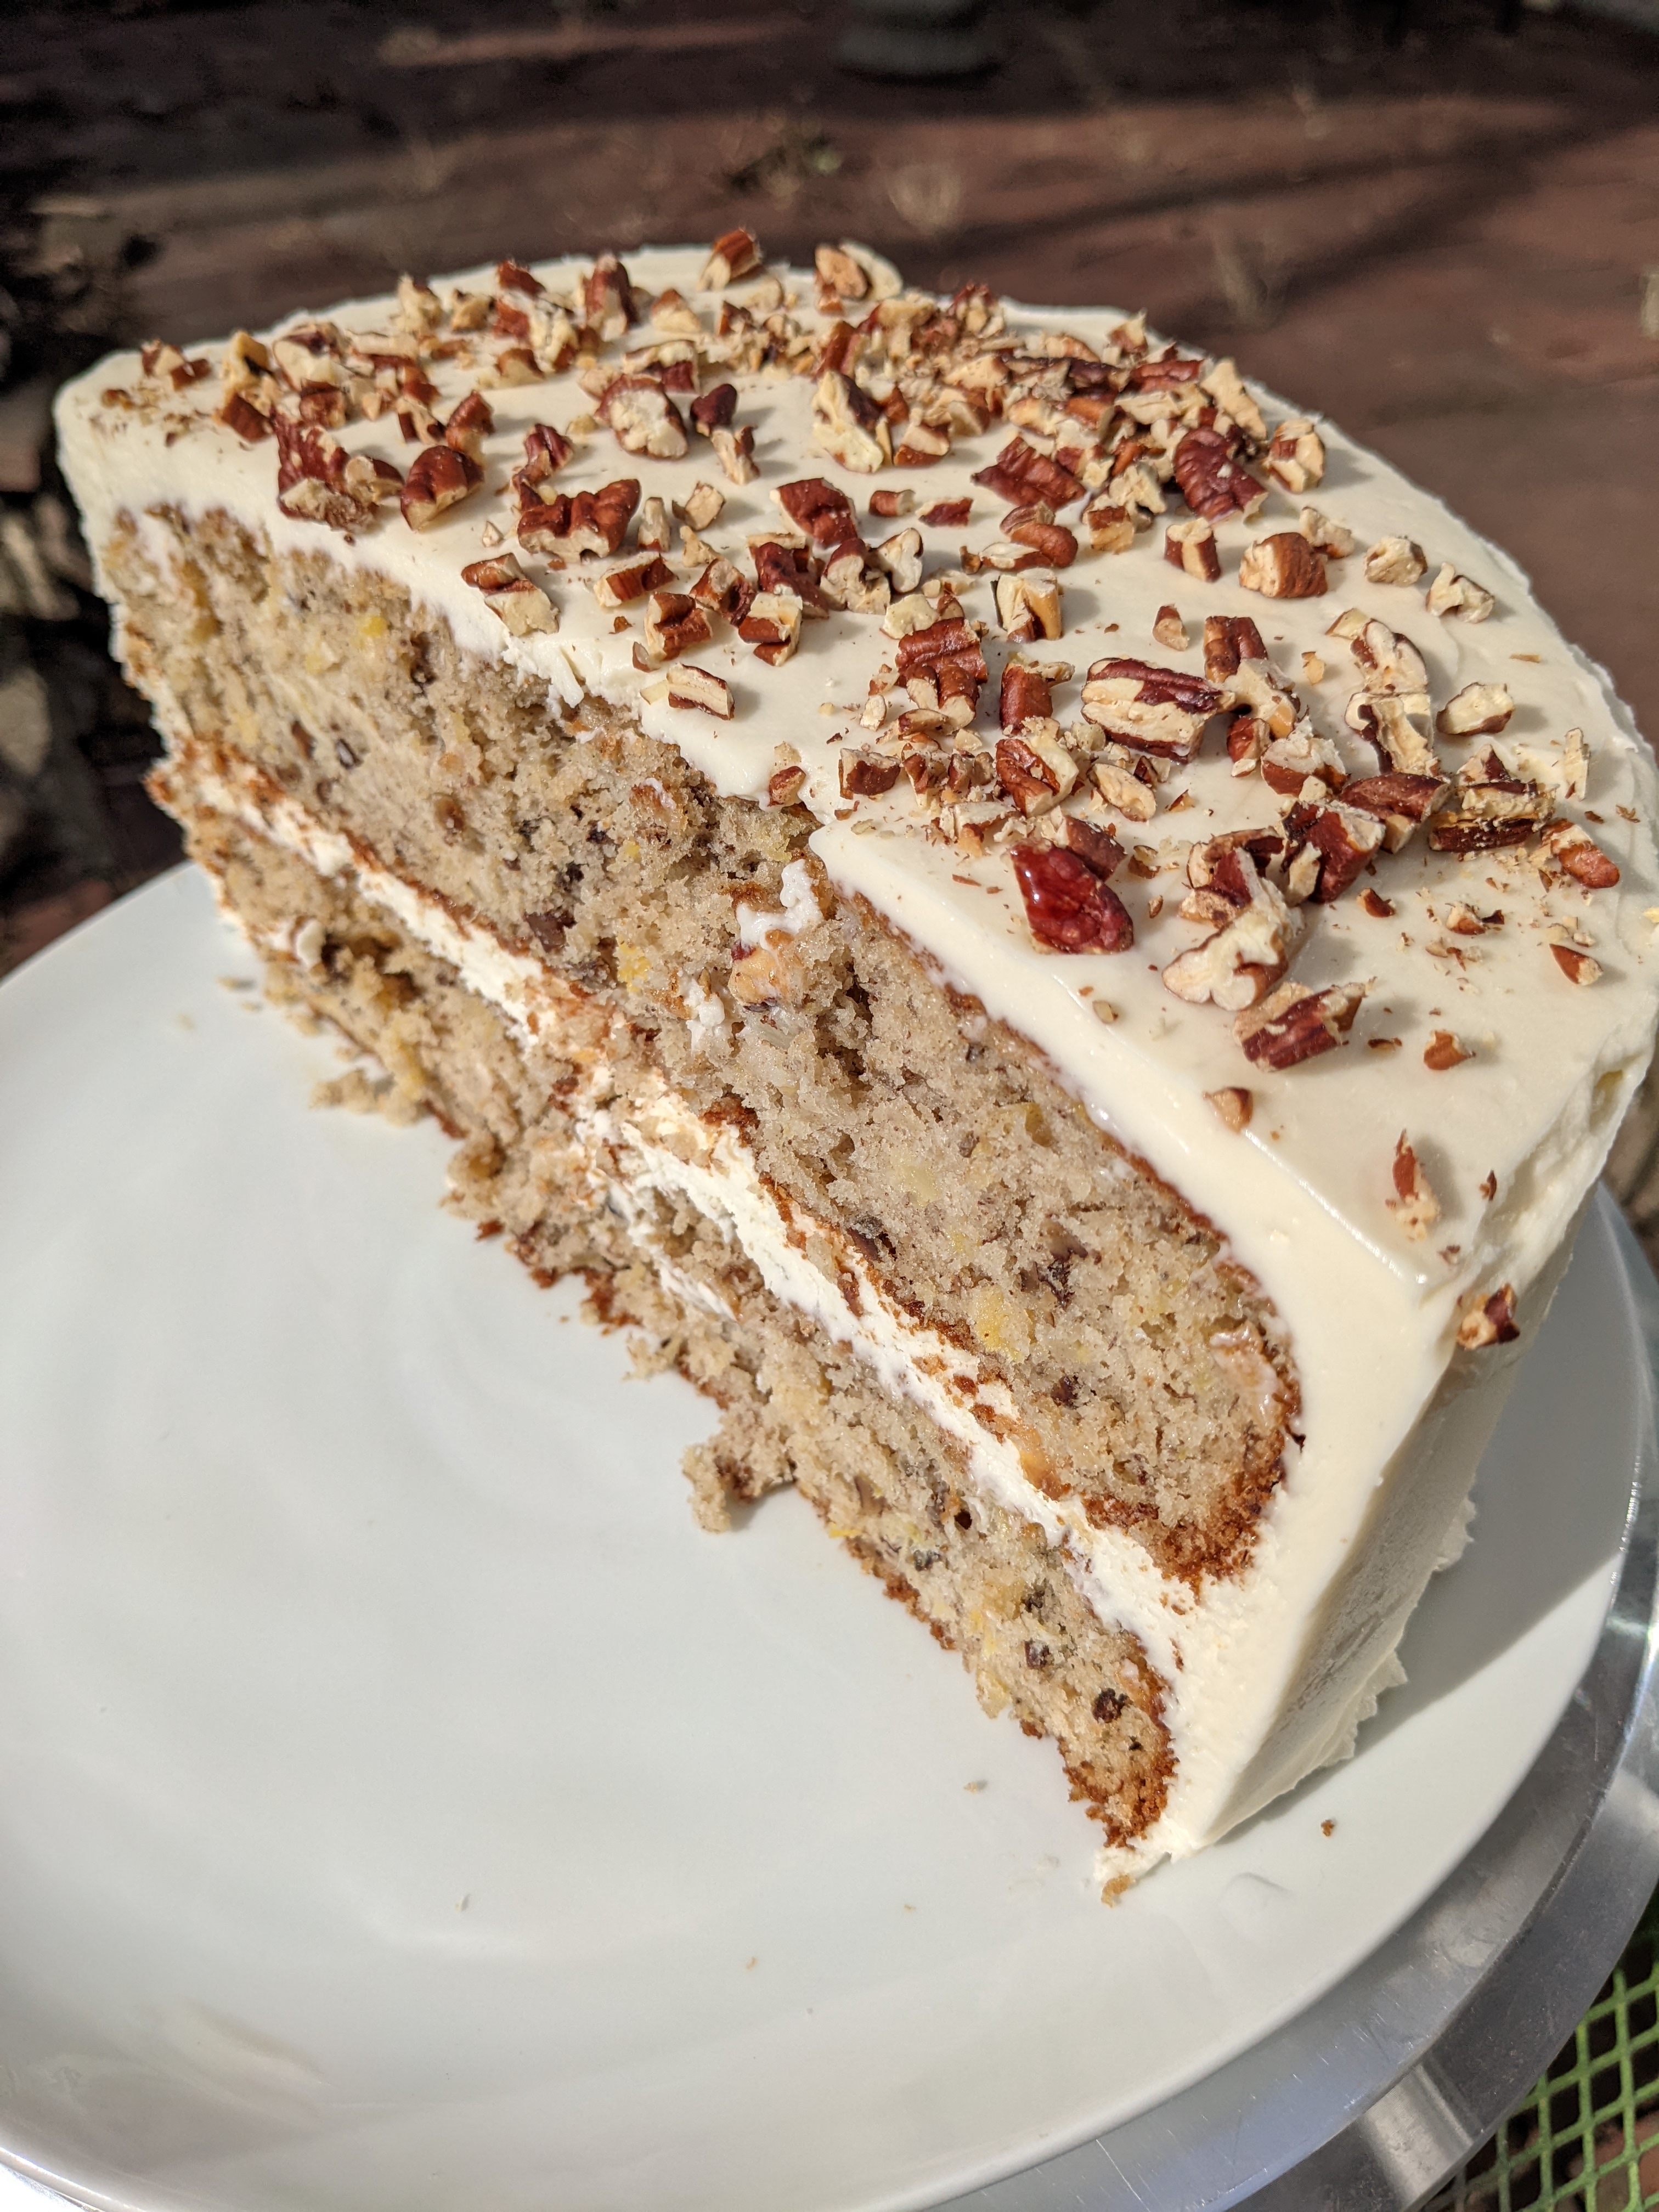 A brown cake with white frosting covered in brown nuts